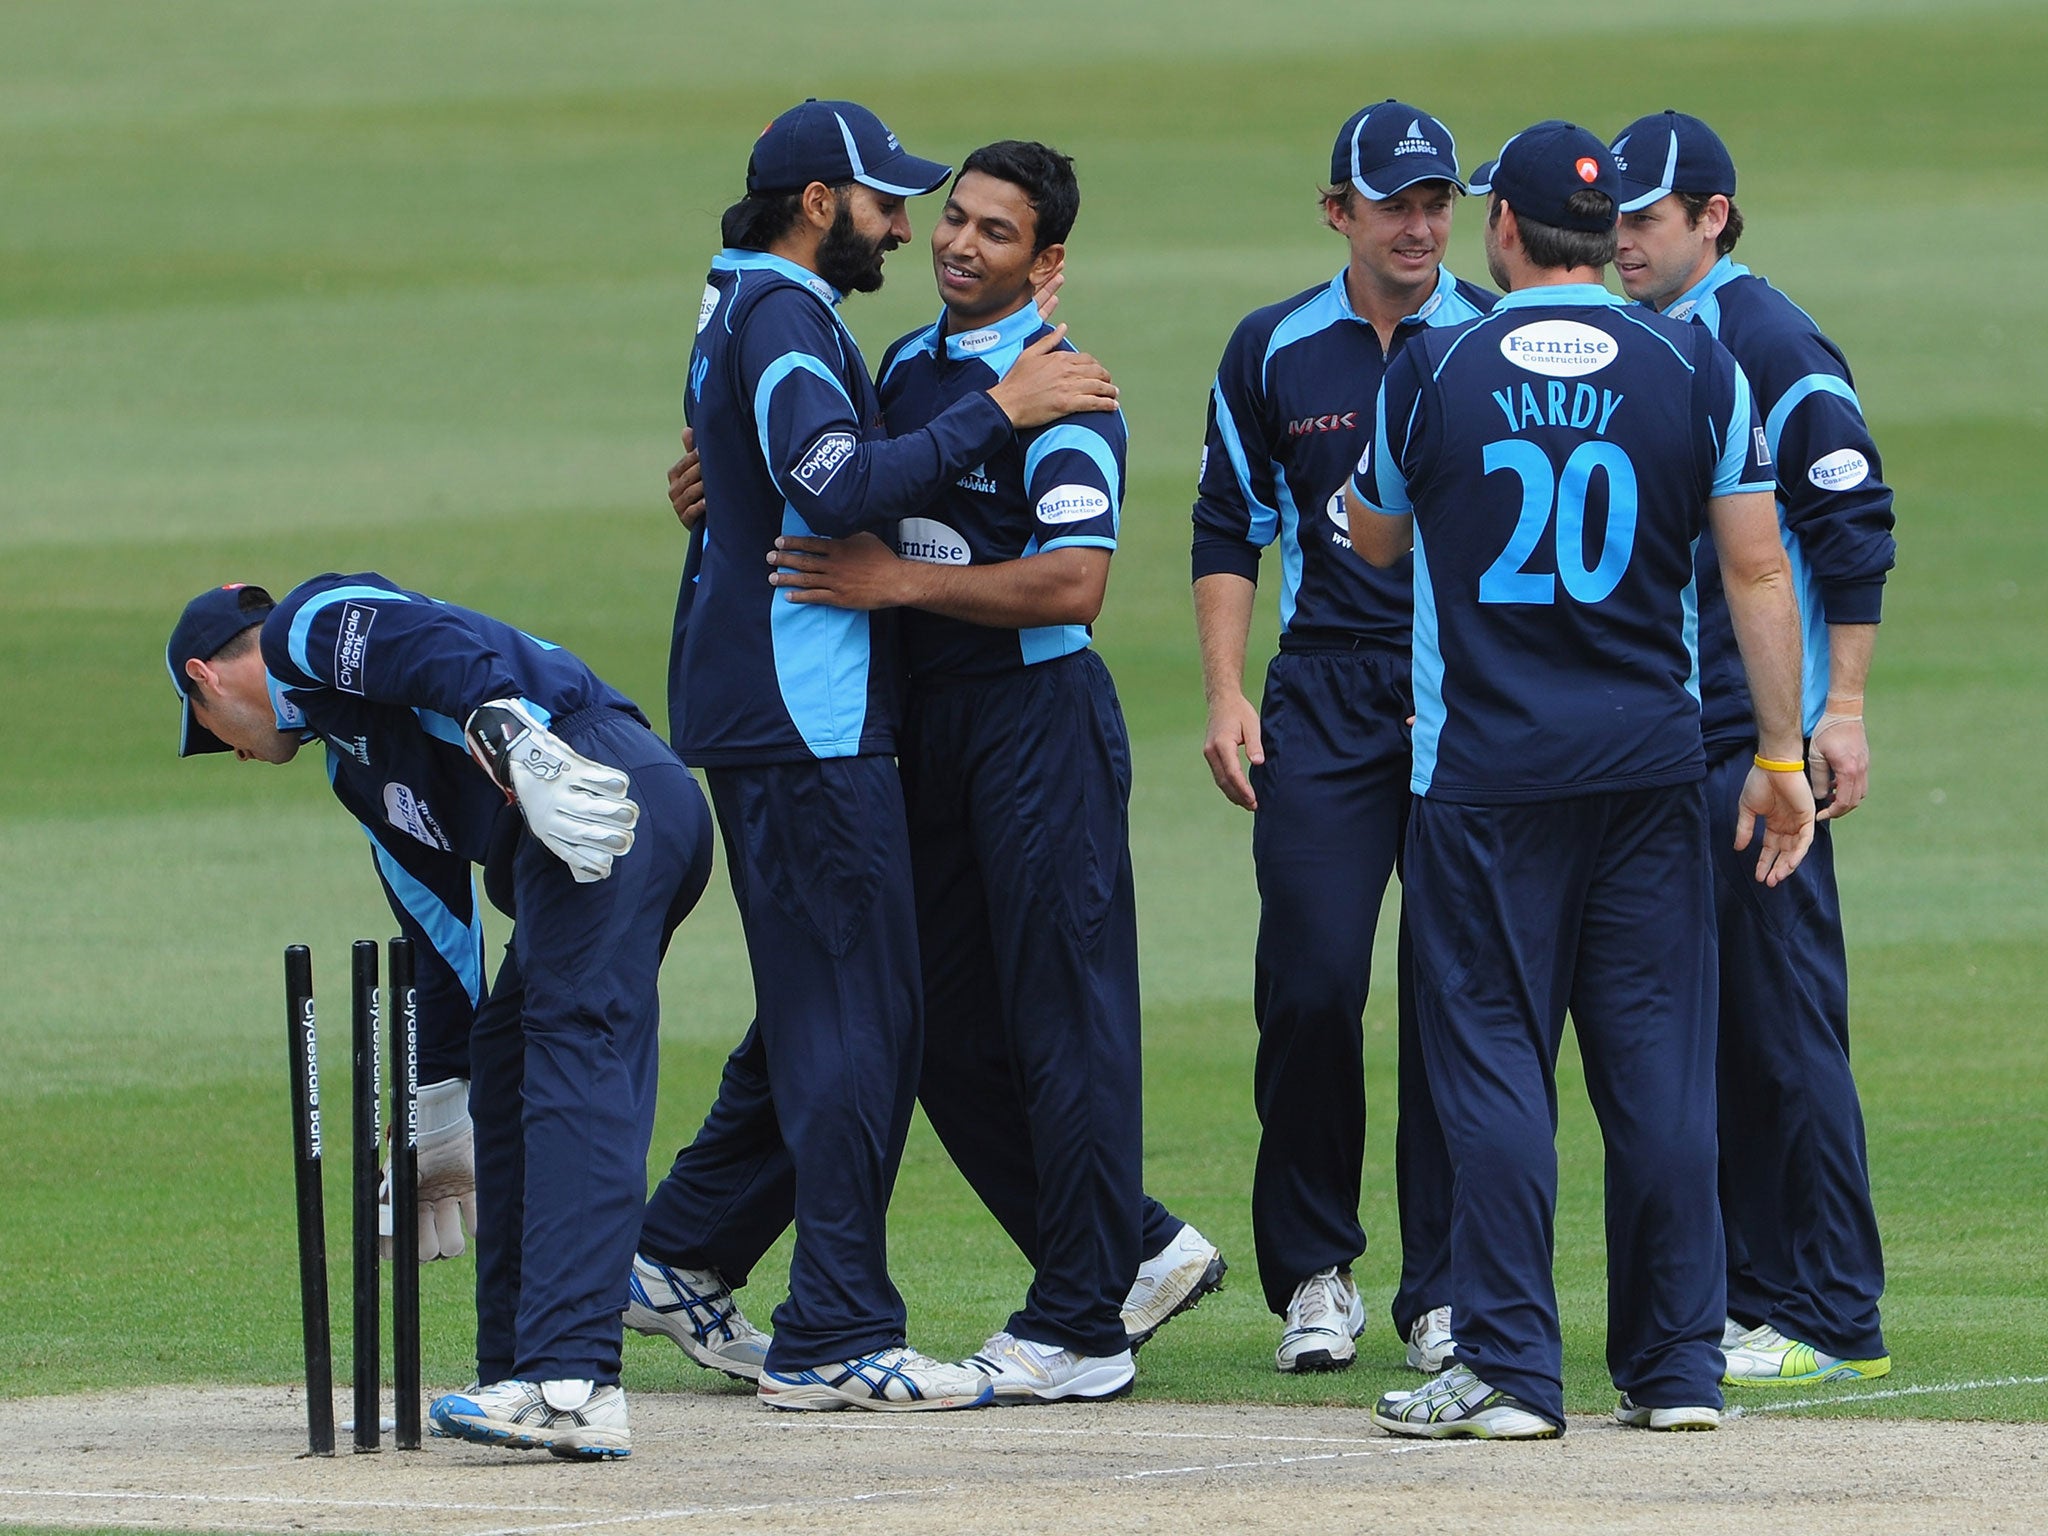 Monty Panesar of Sussex congratulates team mate Naveed Arif on bowling Scott Newman of Middlesex during the Clydesdale Bank 40 between Sussex and Middlesex